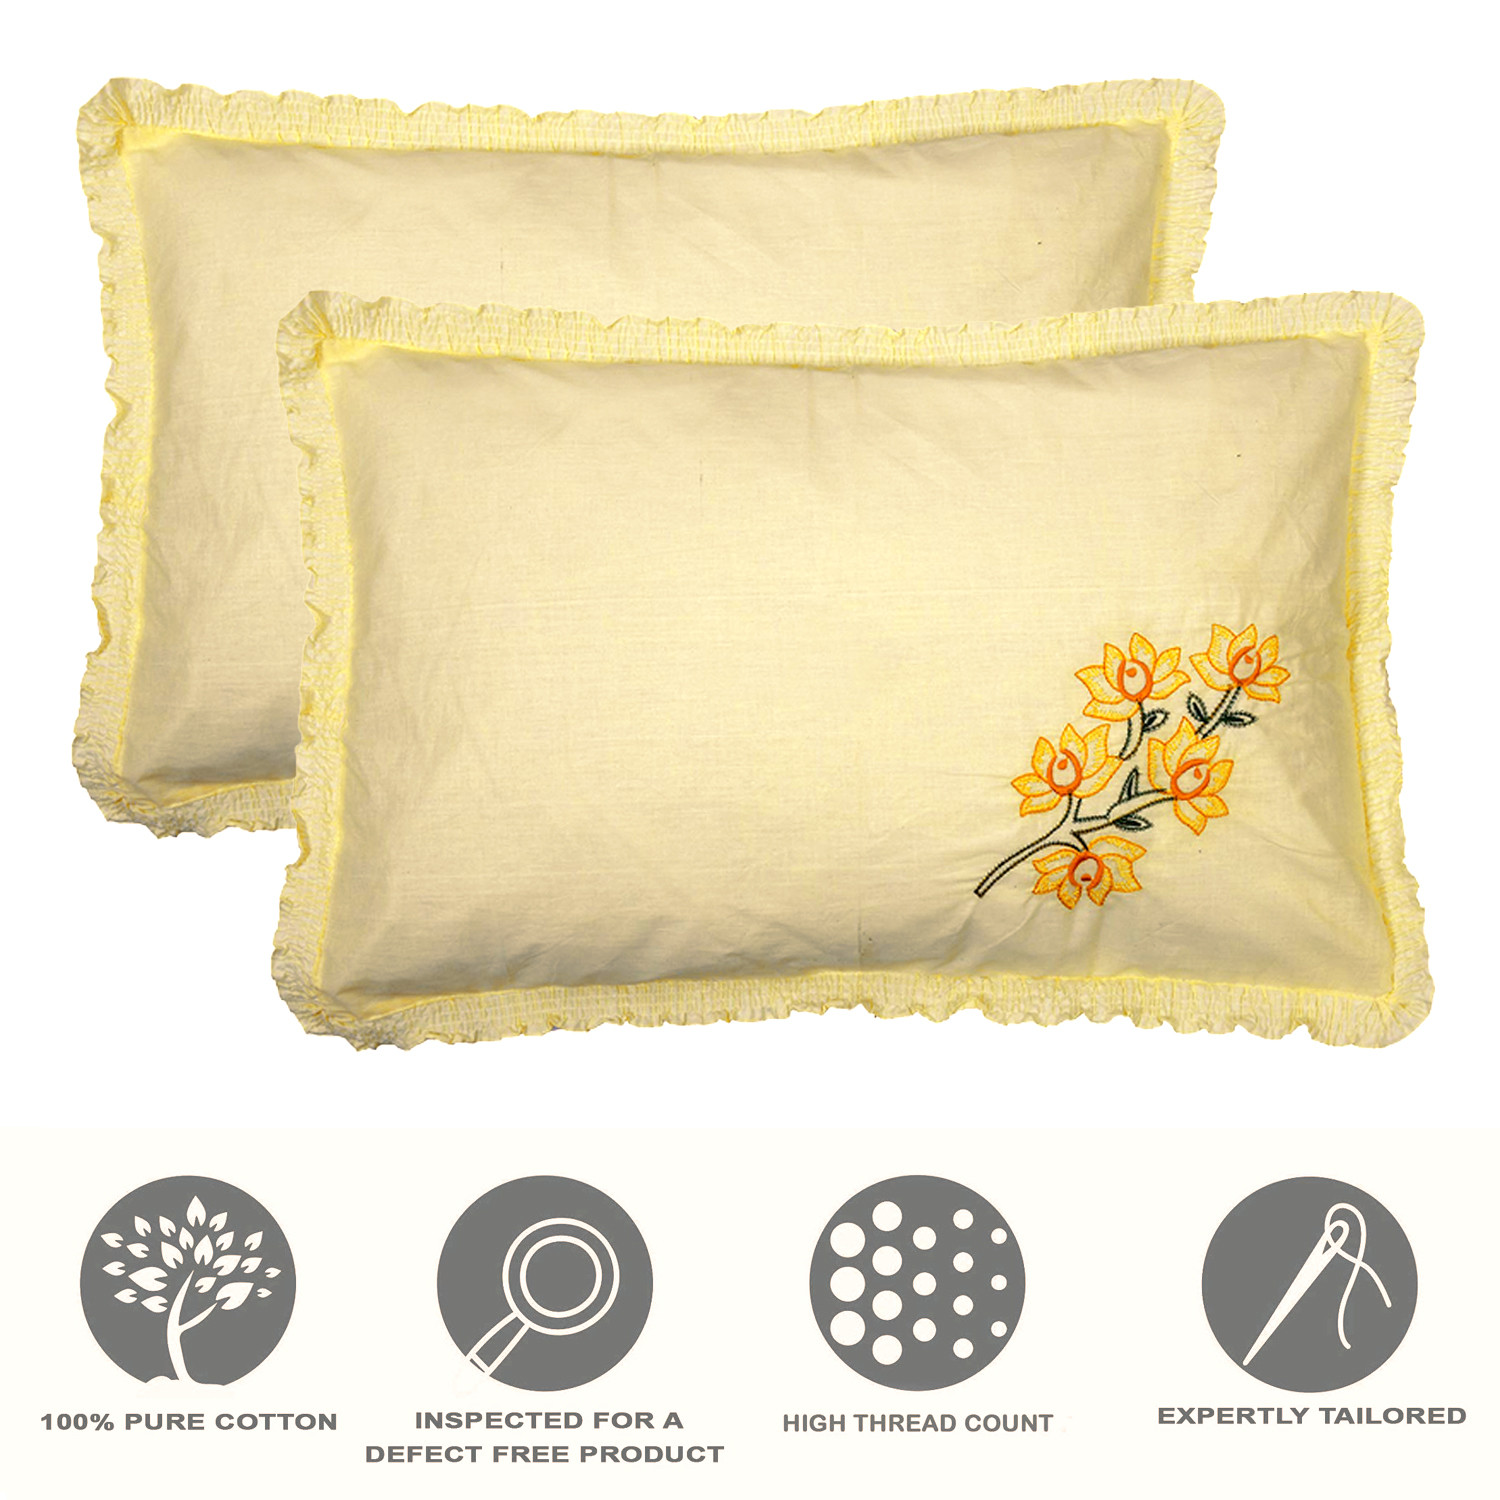 Kuber Industries Embroidery Pattern Breathable & Soft Cotton Pillow Cover For Sofa, Couch, Bed,(Yellow) 54KM4116